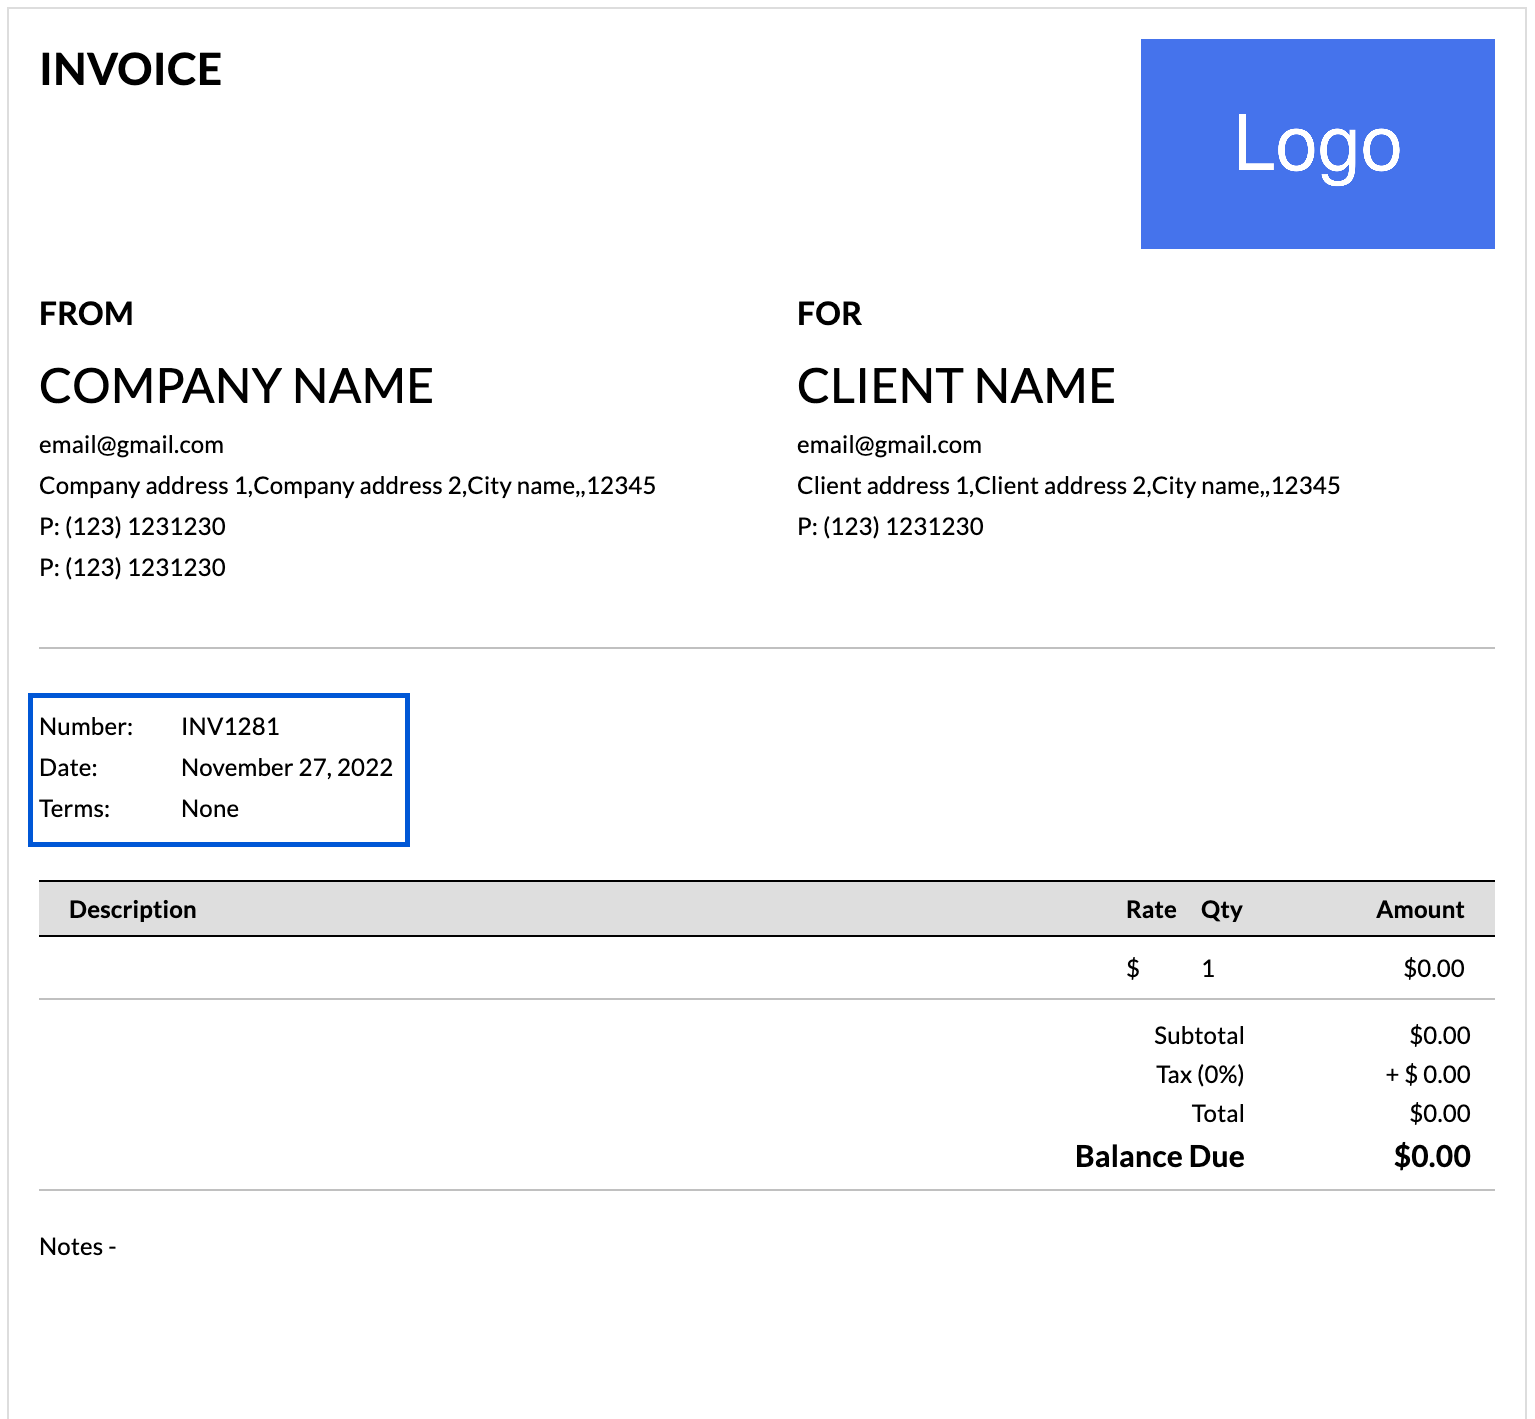 Invoice Number and Dates